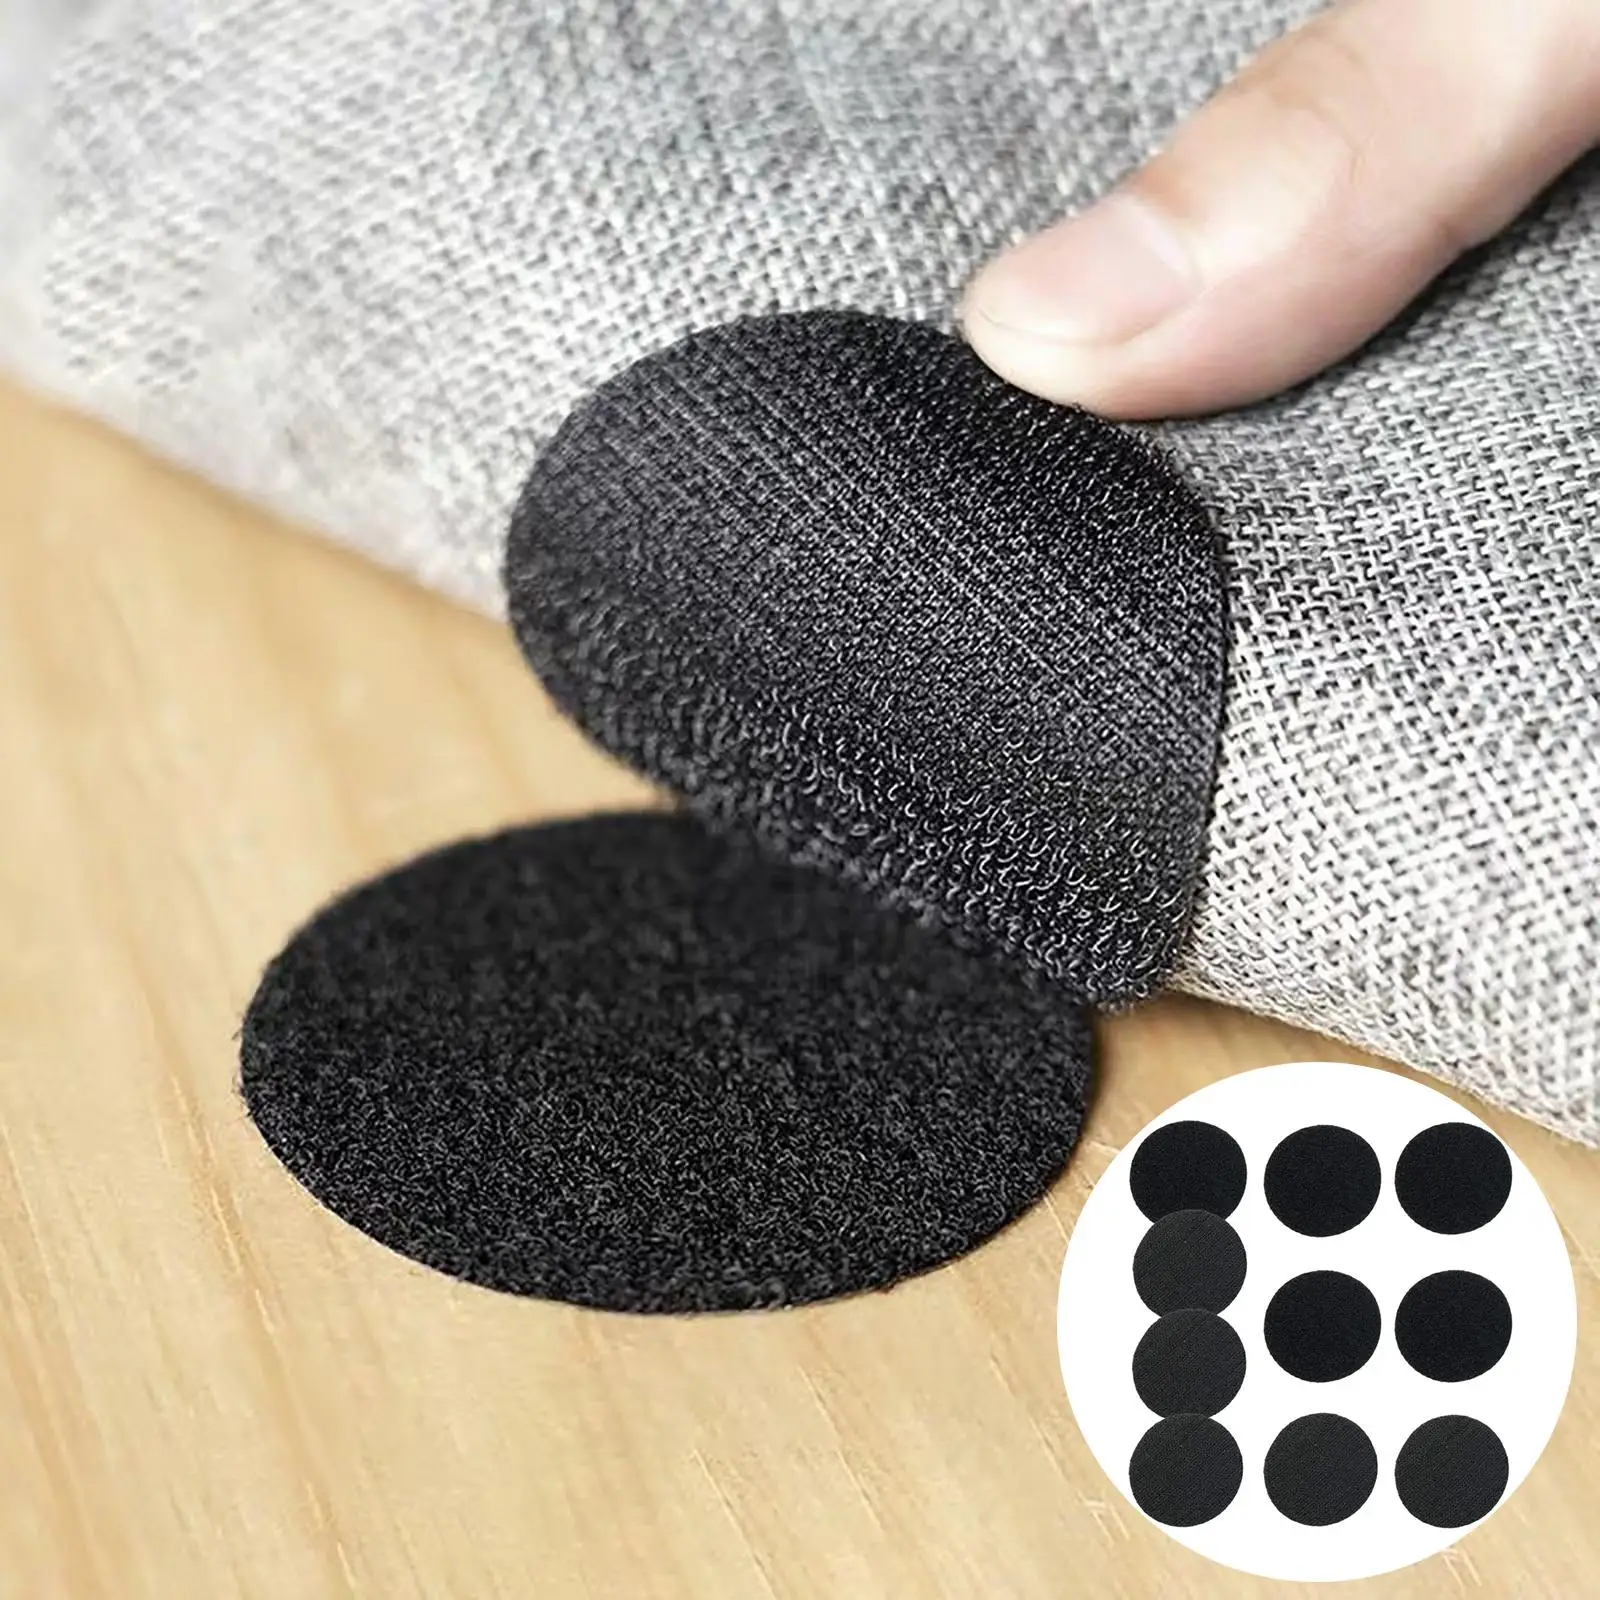 10x Pads Mounting Fastener Dots Reusable Invisible Removable for Bed Sheet Sofa Cushion Sofa Mat Household Carpet Dormitory